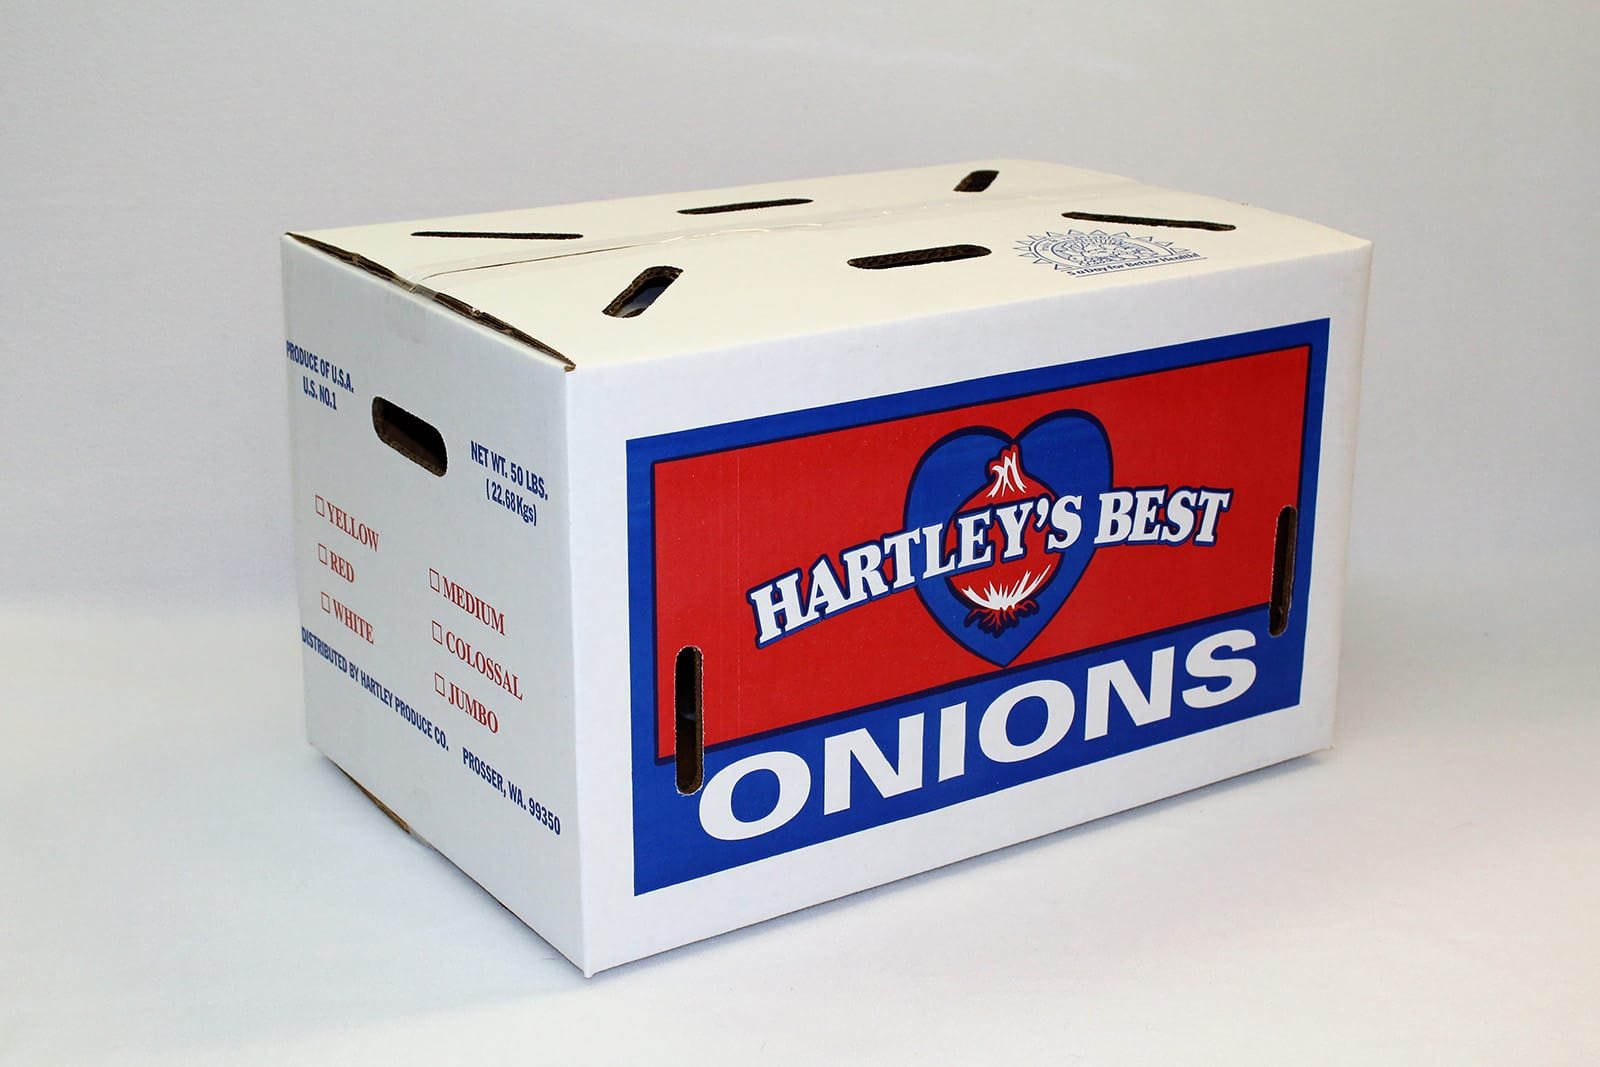 Onions - Hartley's Best 2